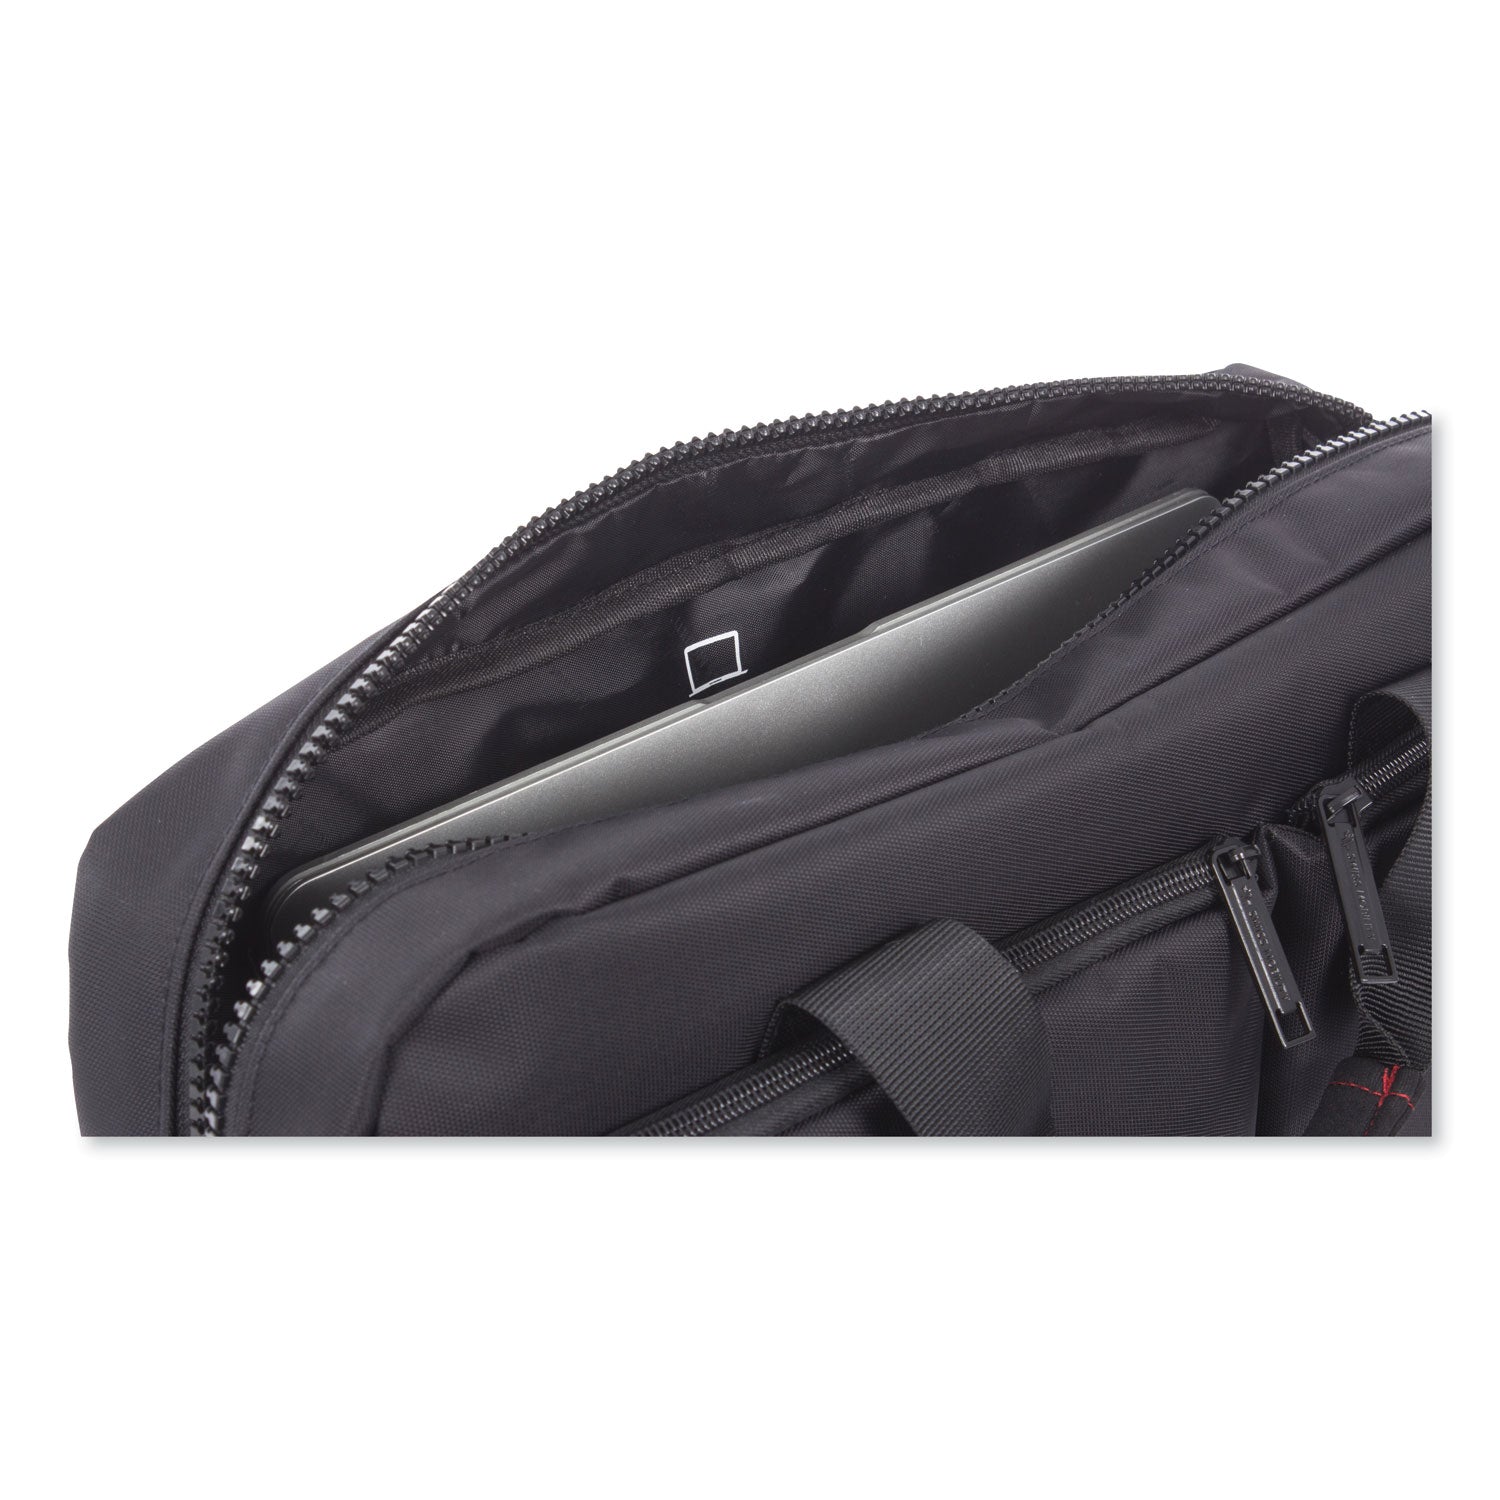 stride-executive-briefcase-fits-devices-up-to-156-polyester-4-x-4-x-115-black_swzexb1020smbk - 4